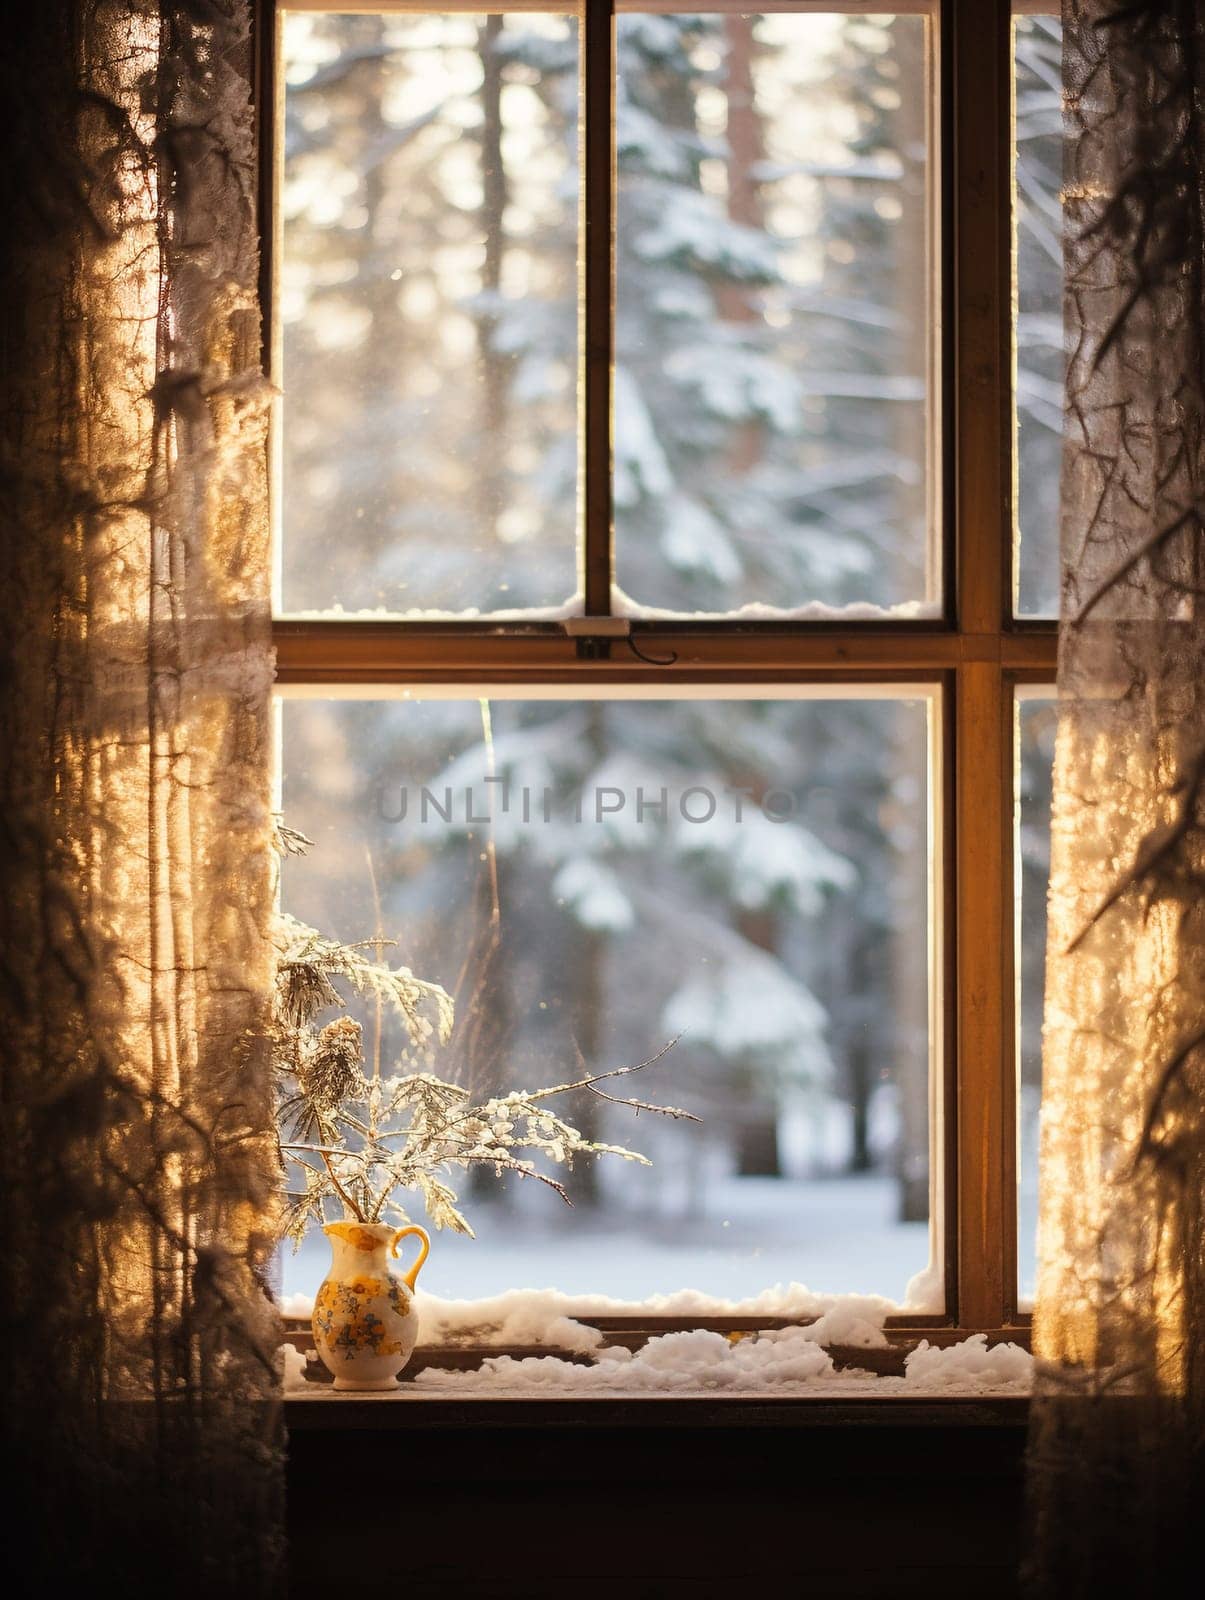 View through the window of a cottage into a snow-covered winter forest